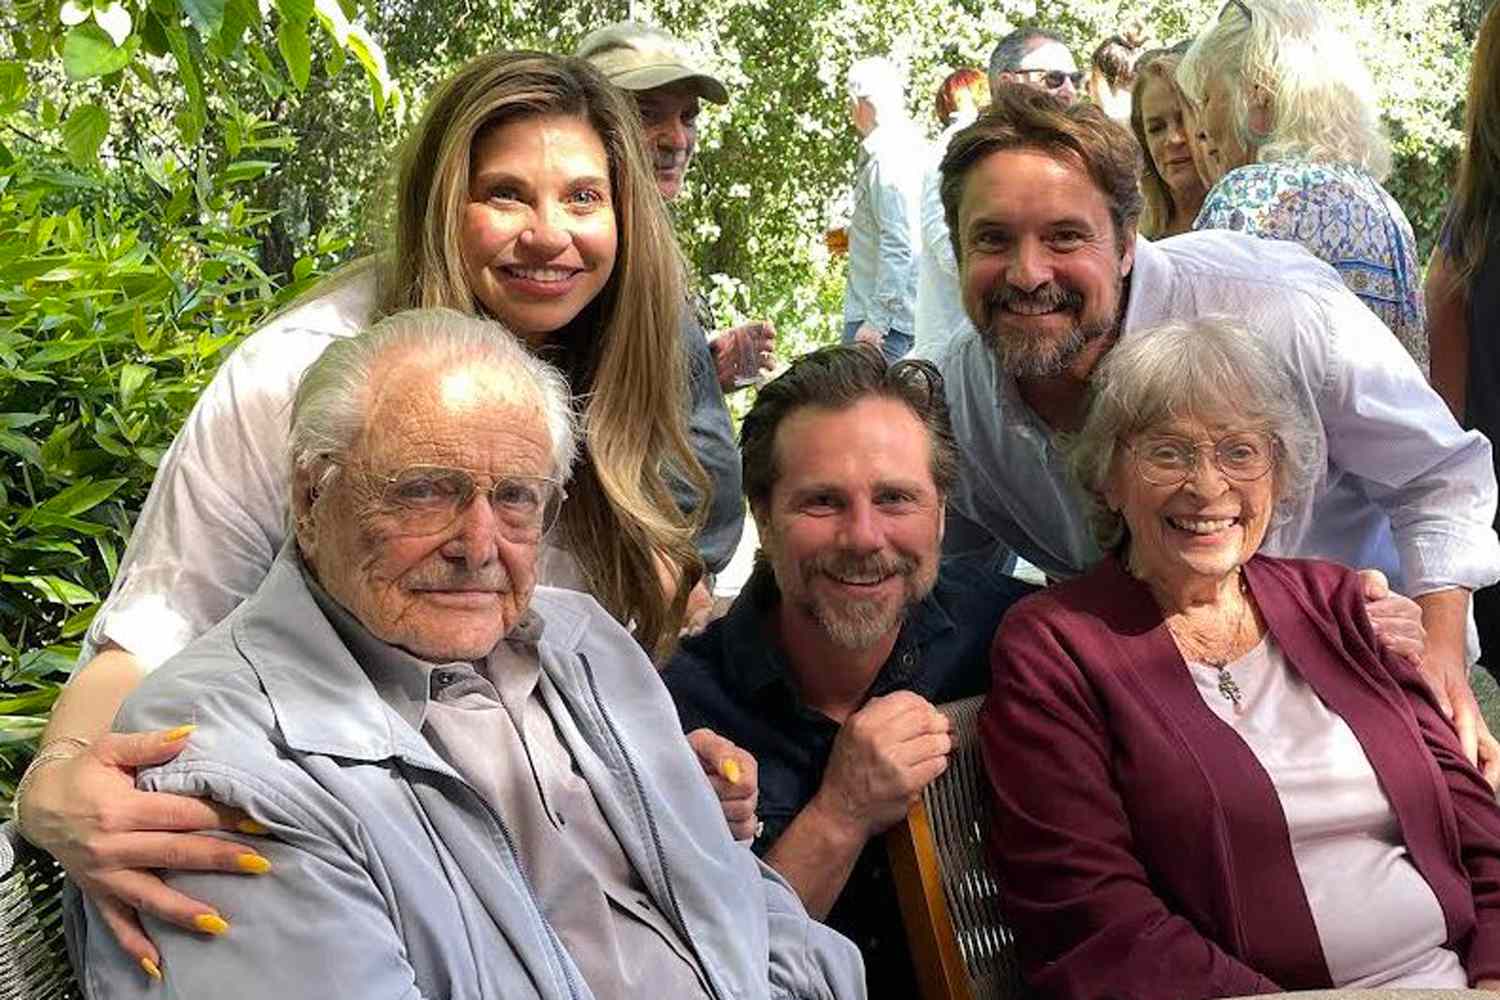 'Boy Meets World' star William Daniels reunites with his ‘favorite students’